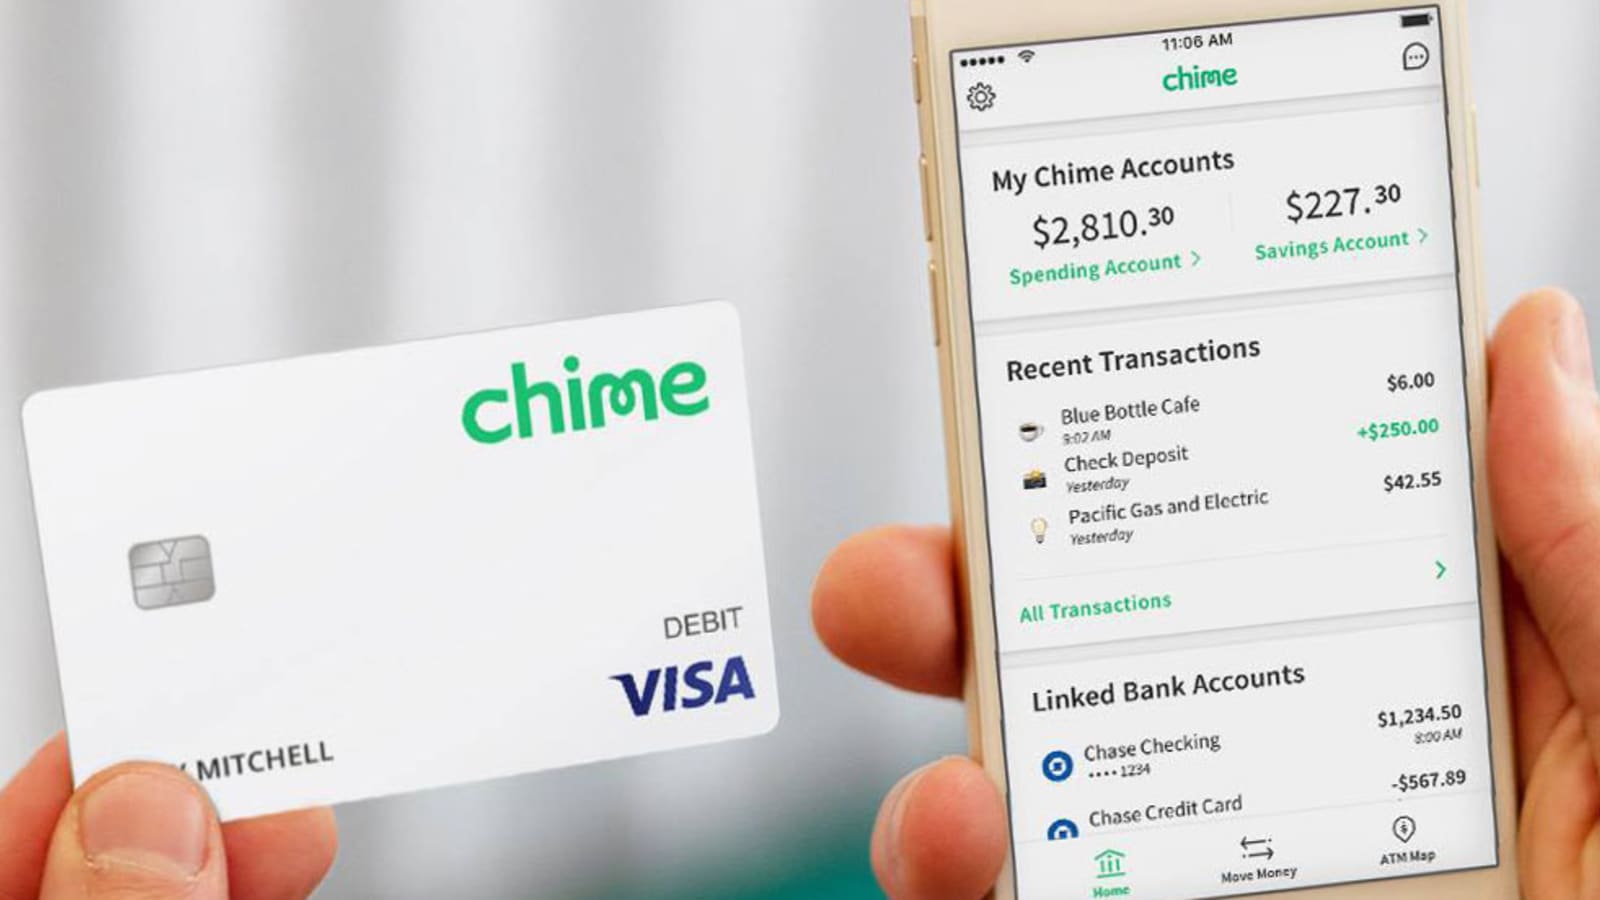 How To Move Money From Savings To Checking Chime?